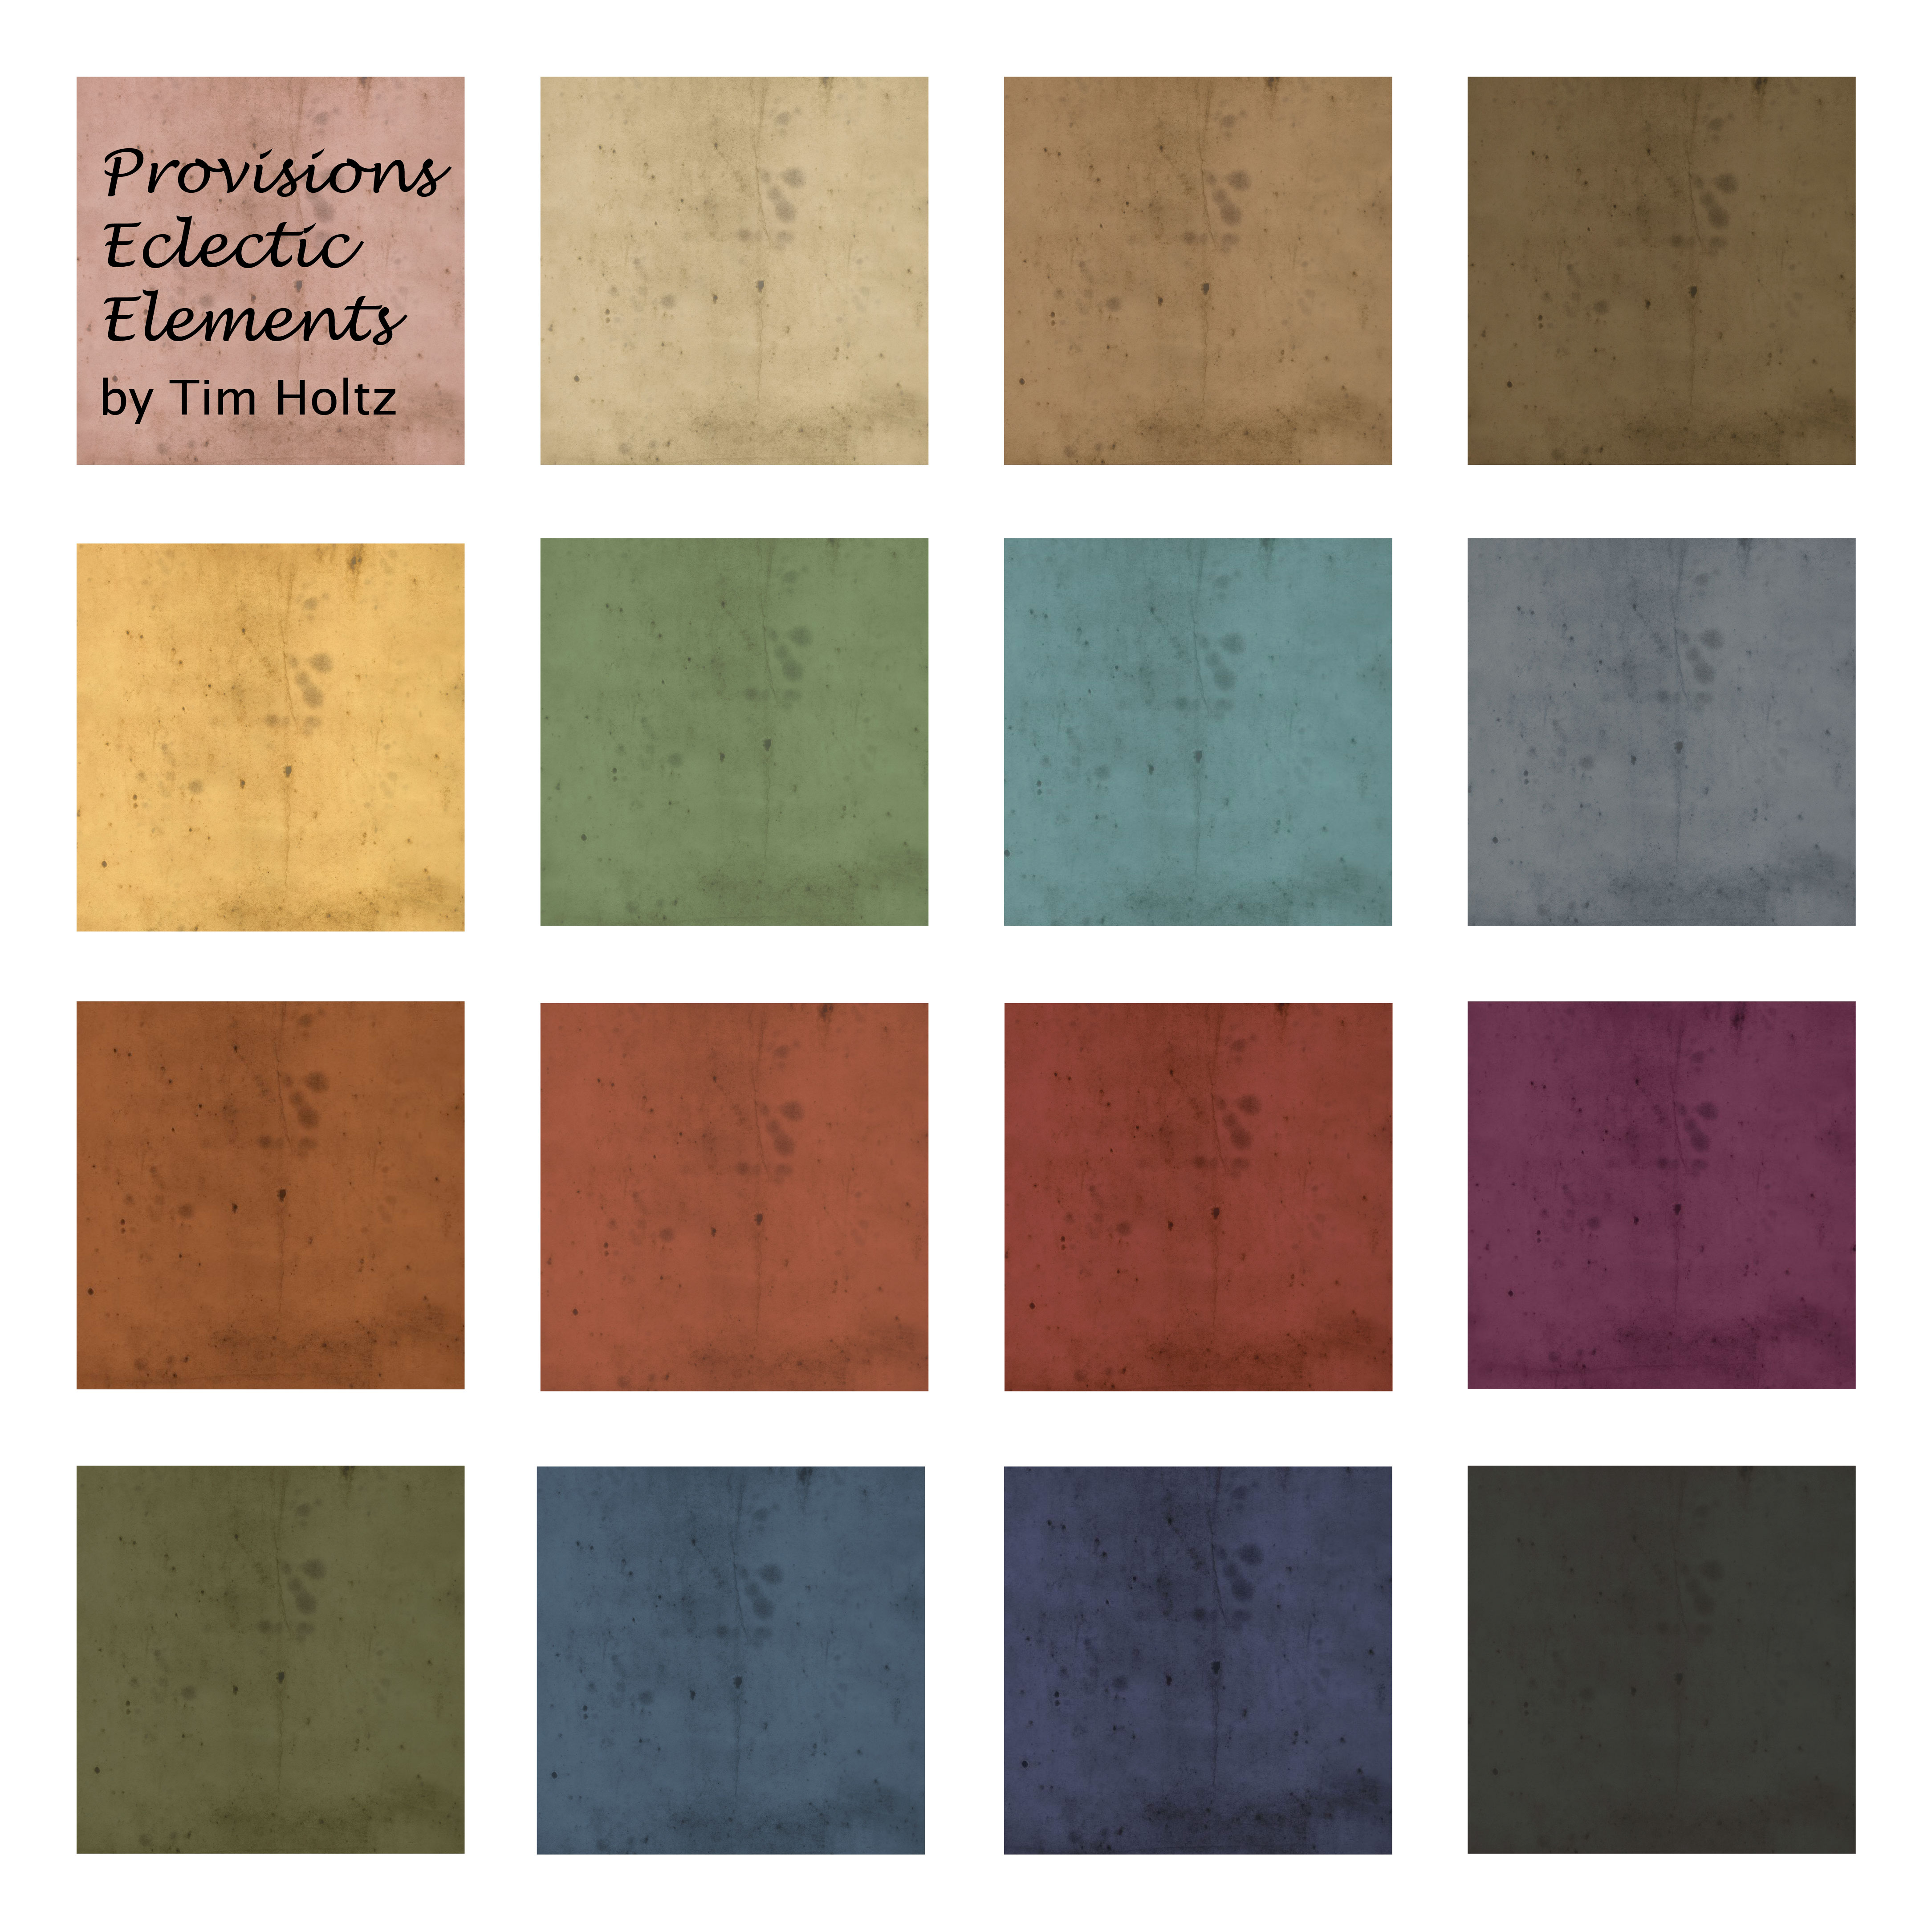 This image shows sixteen fabric swatches in the collection “Provisions Eclectic Elements” by Tim Holtz. Colors are muted shades of the rainbow with a speckled or tarnished texture.